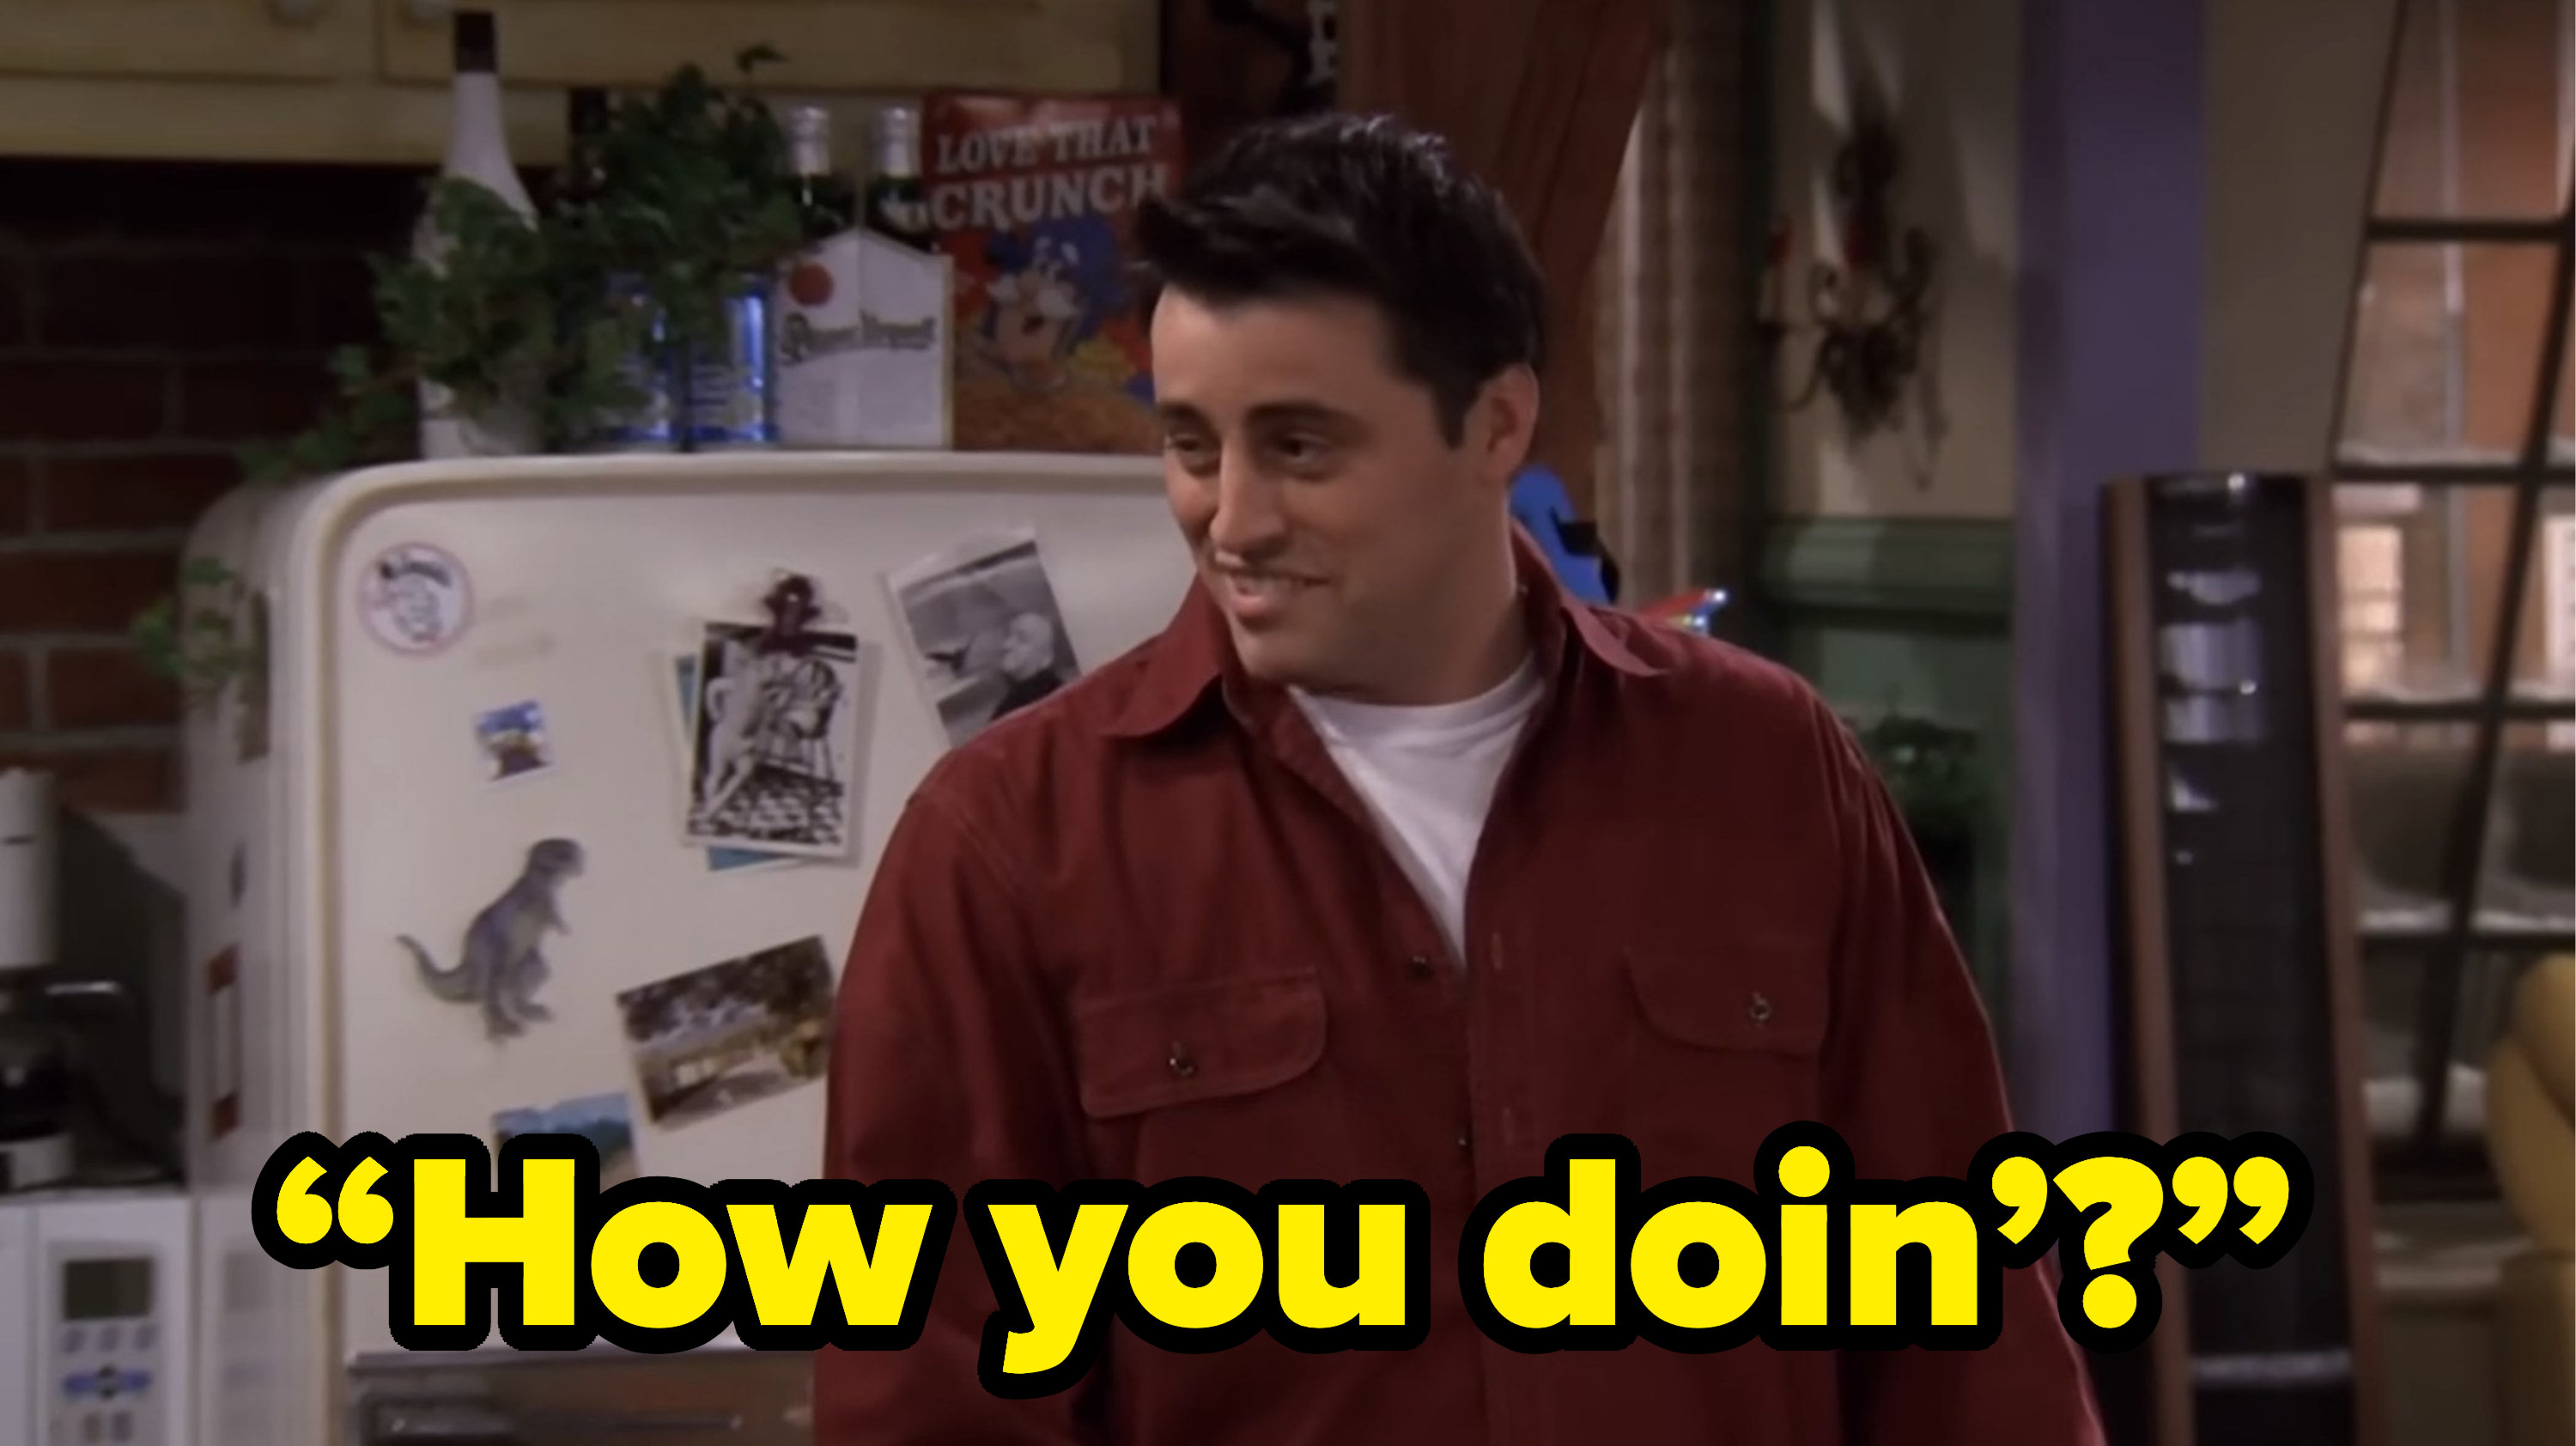 joey saying “How you doin’?” on friends